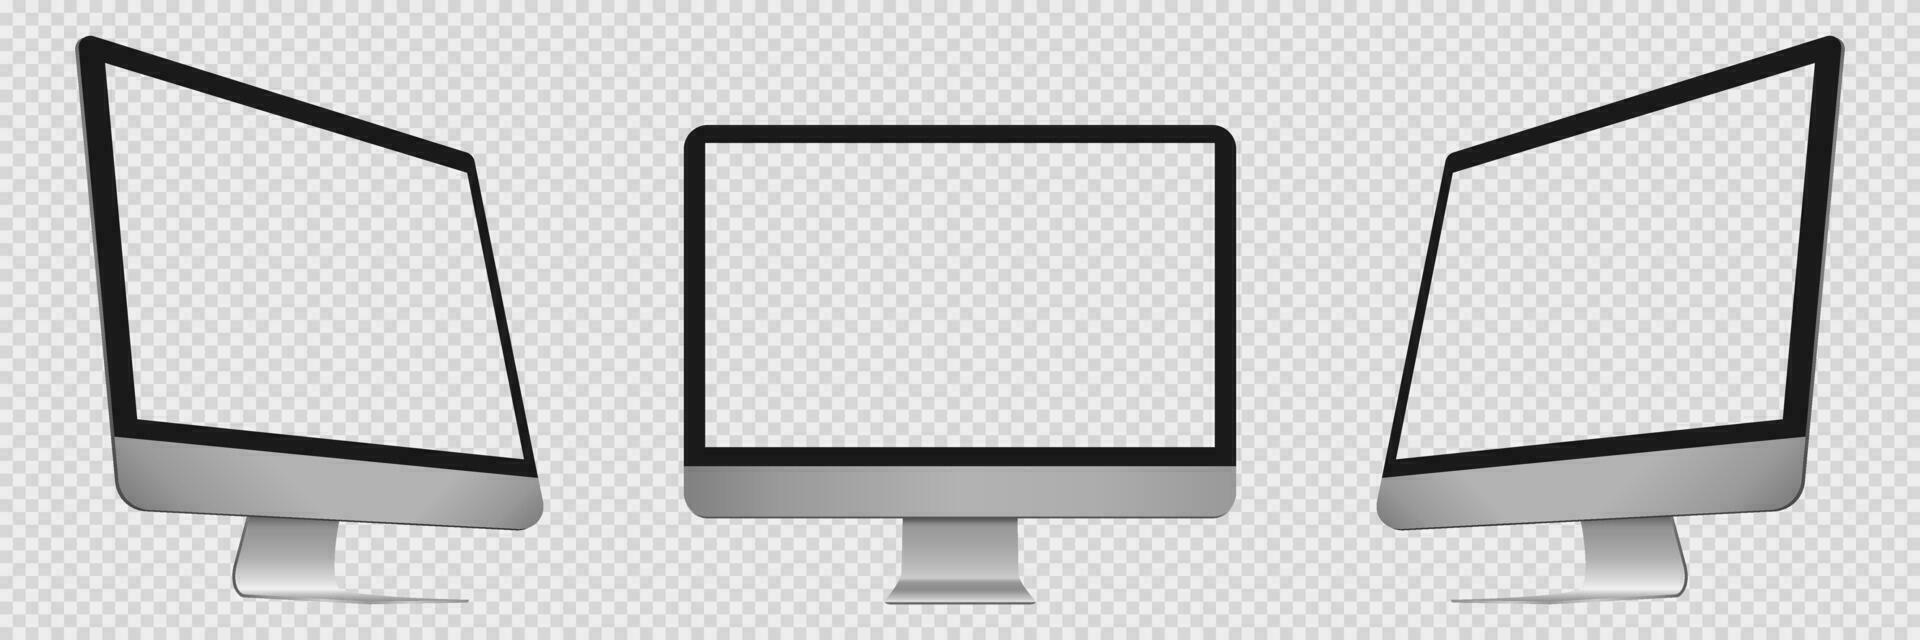 Desktop computer with transparent display. PC in front and side view. Isolated realistic mockup of computer screen. Desktop monitor with editable display. Vector EPS 10.